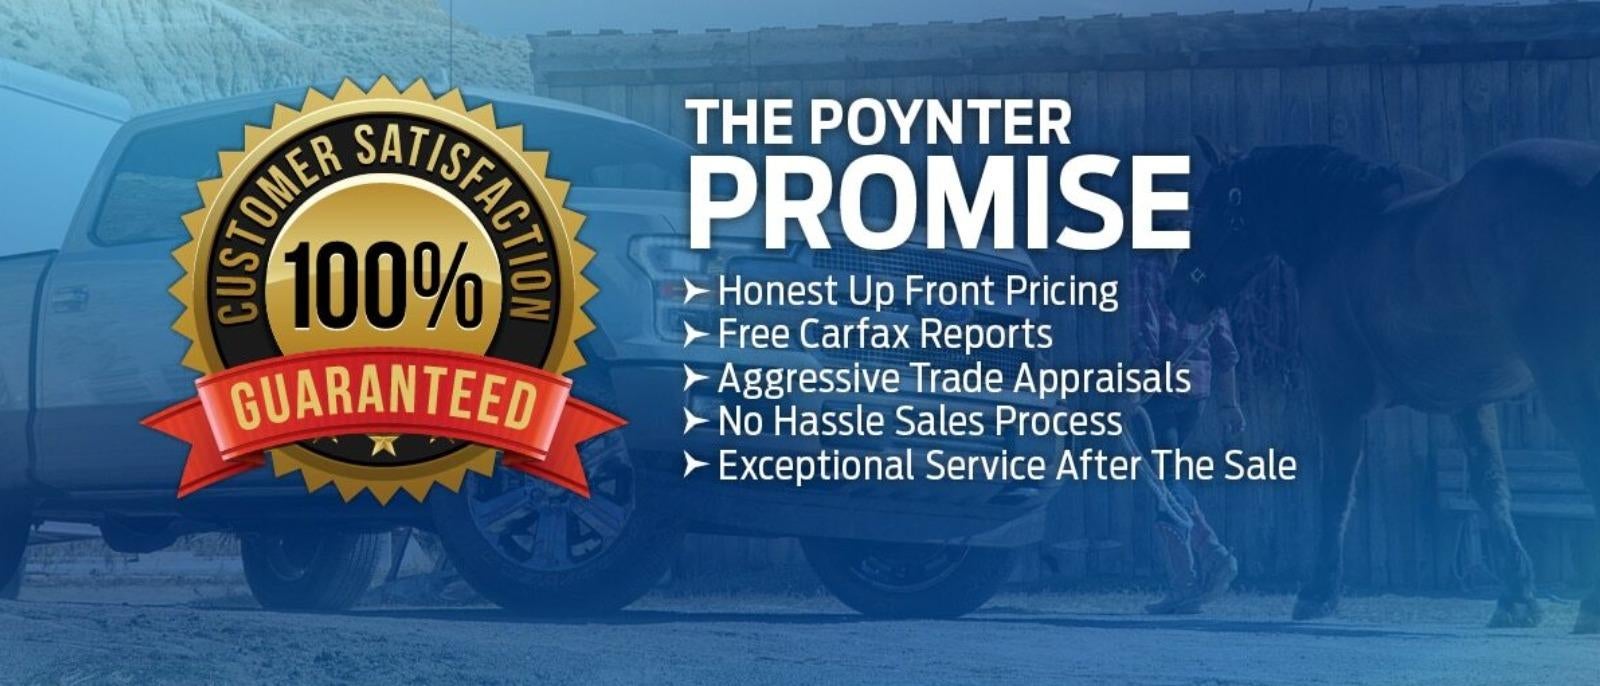 The Poynter Promise on All Vehicles